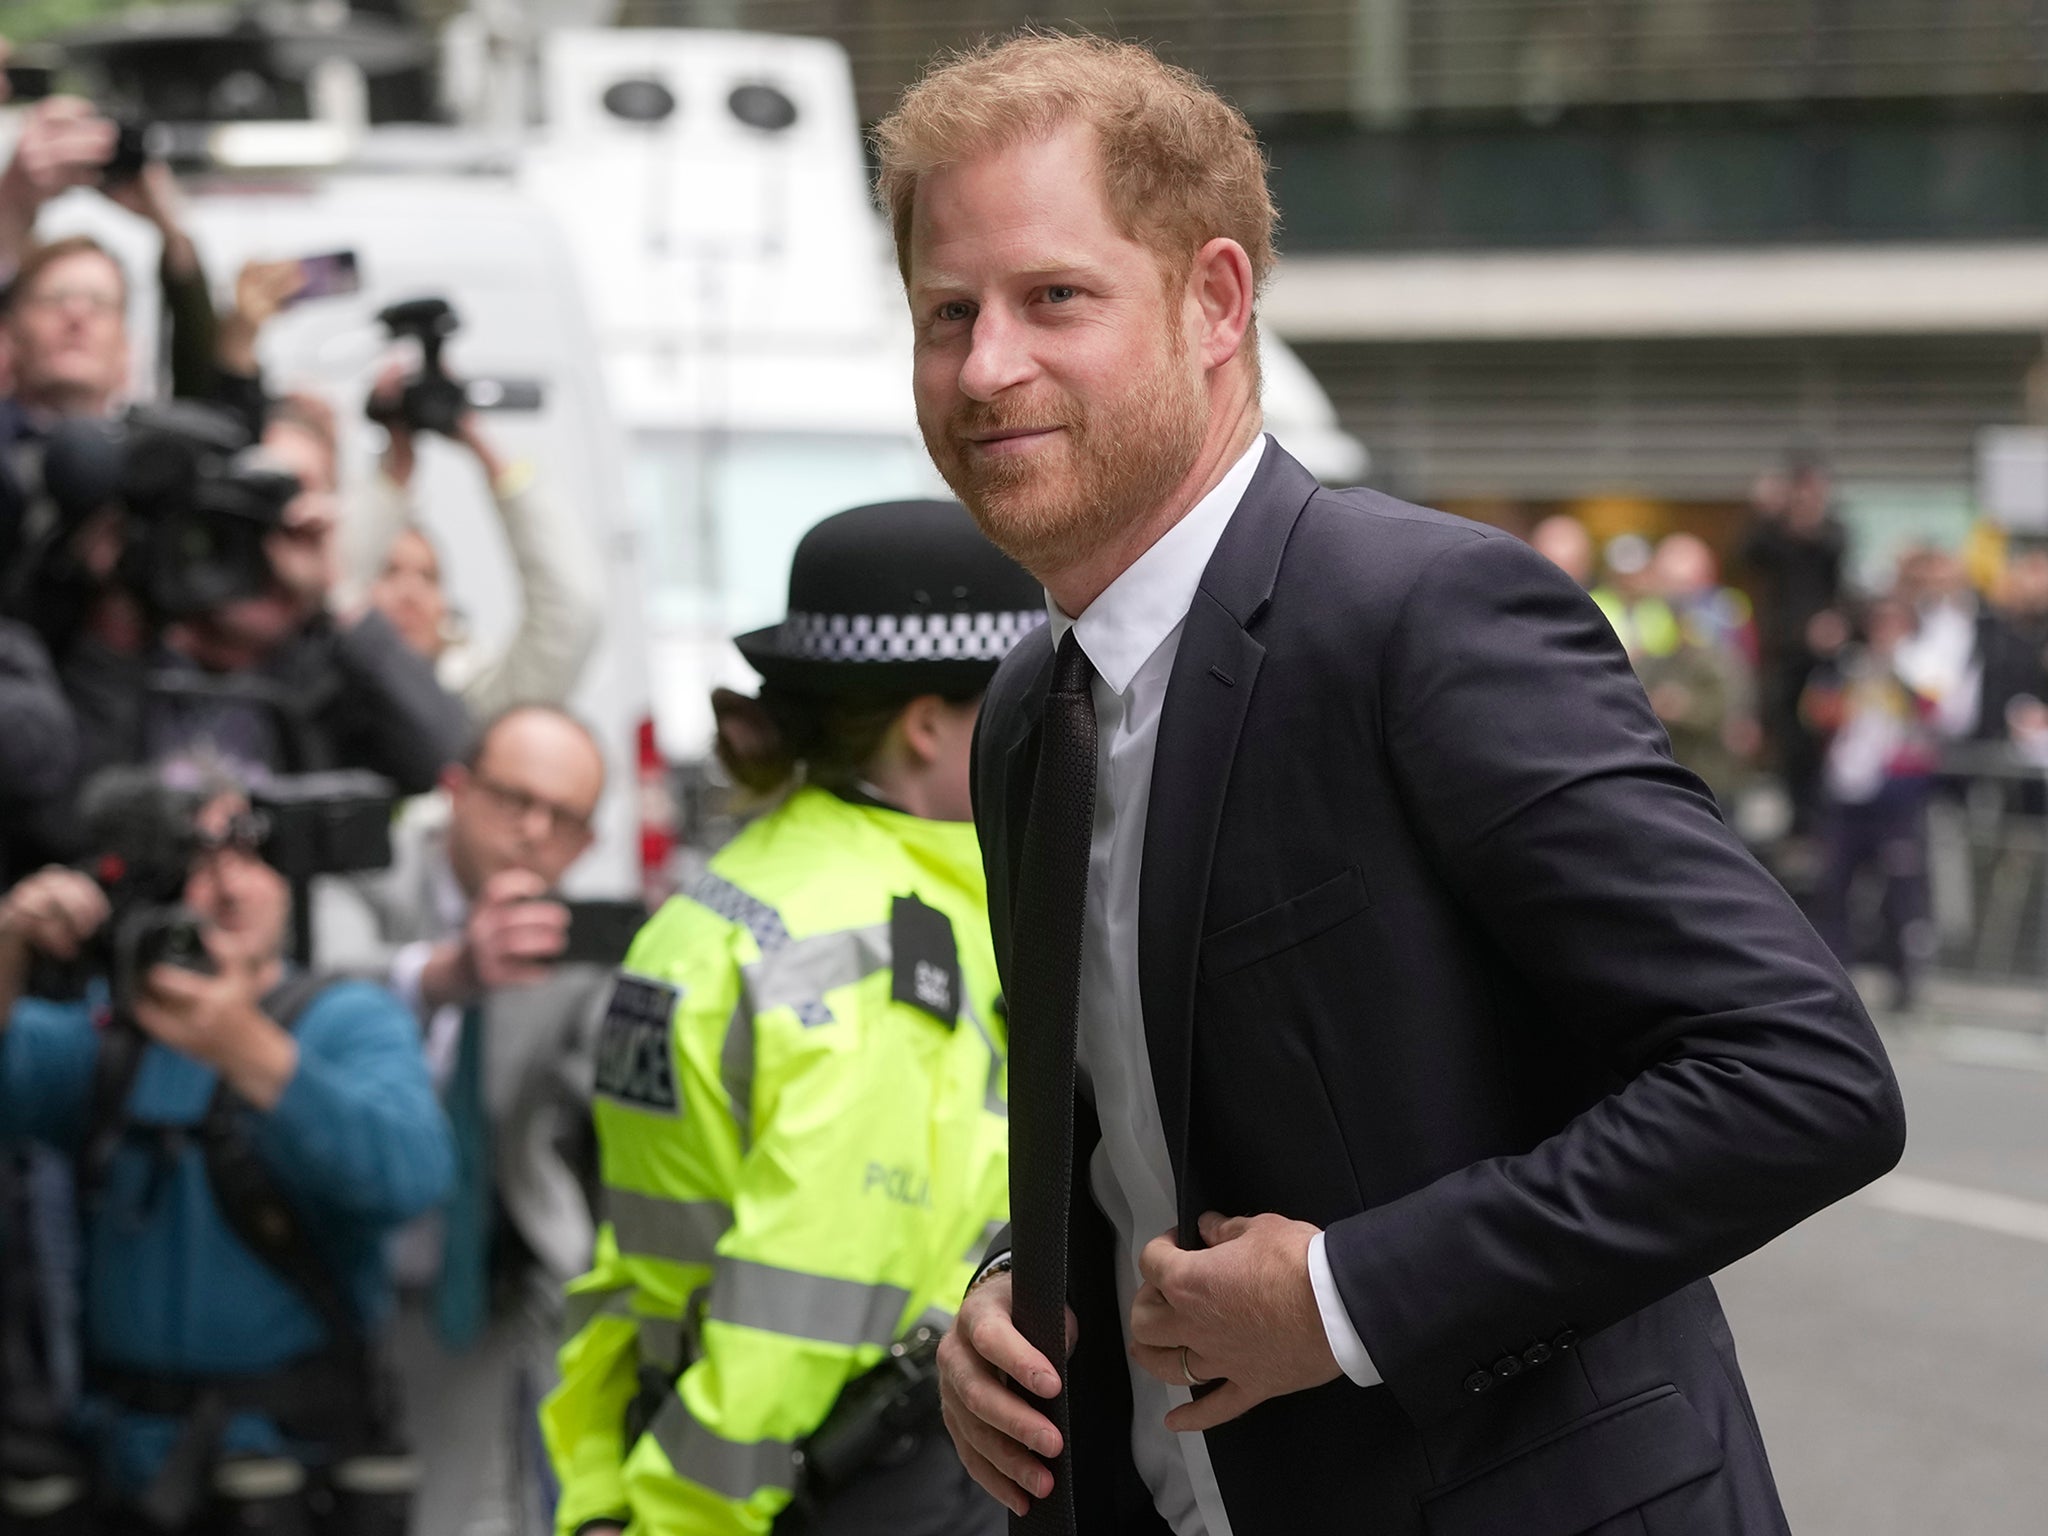 Prince Harry is also prosecuting the media in a very different forum – the court of public opinion